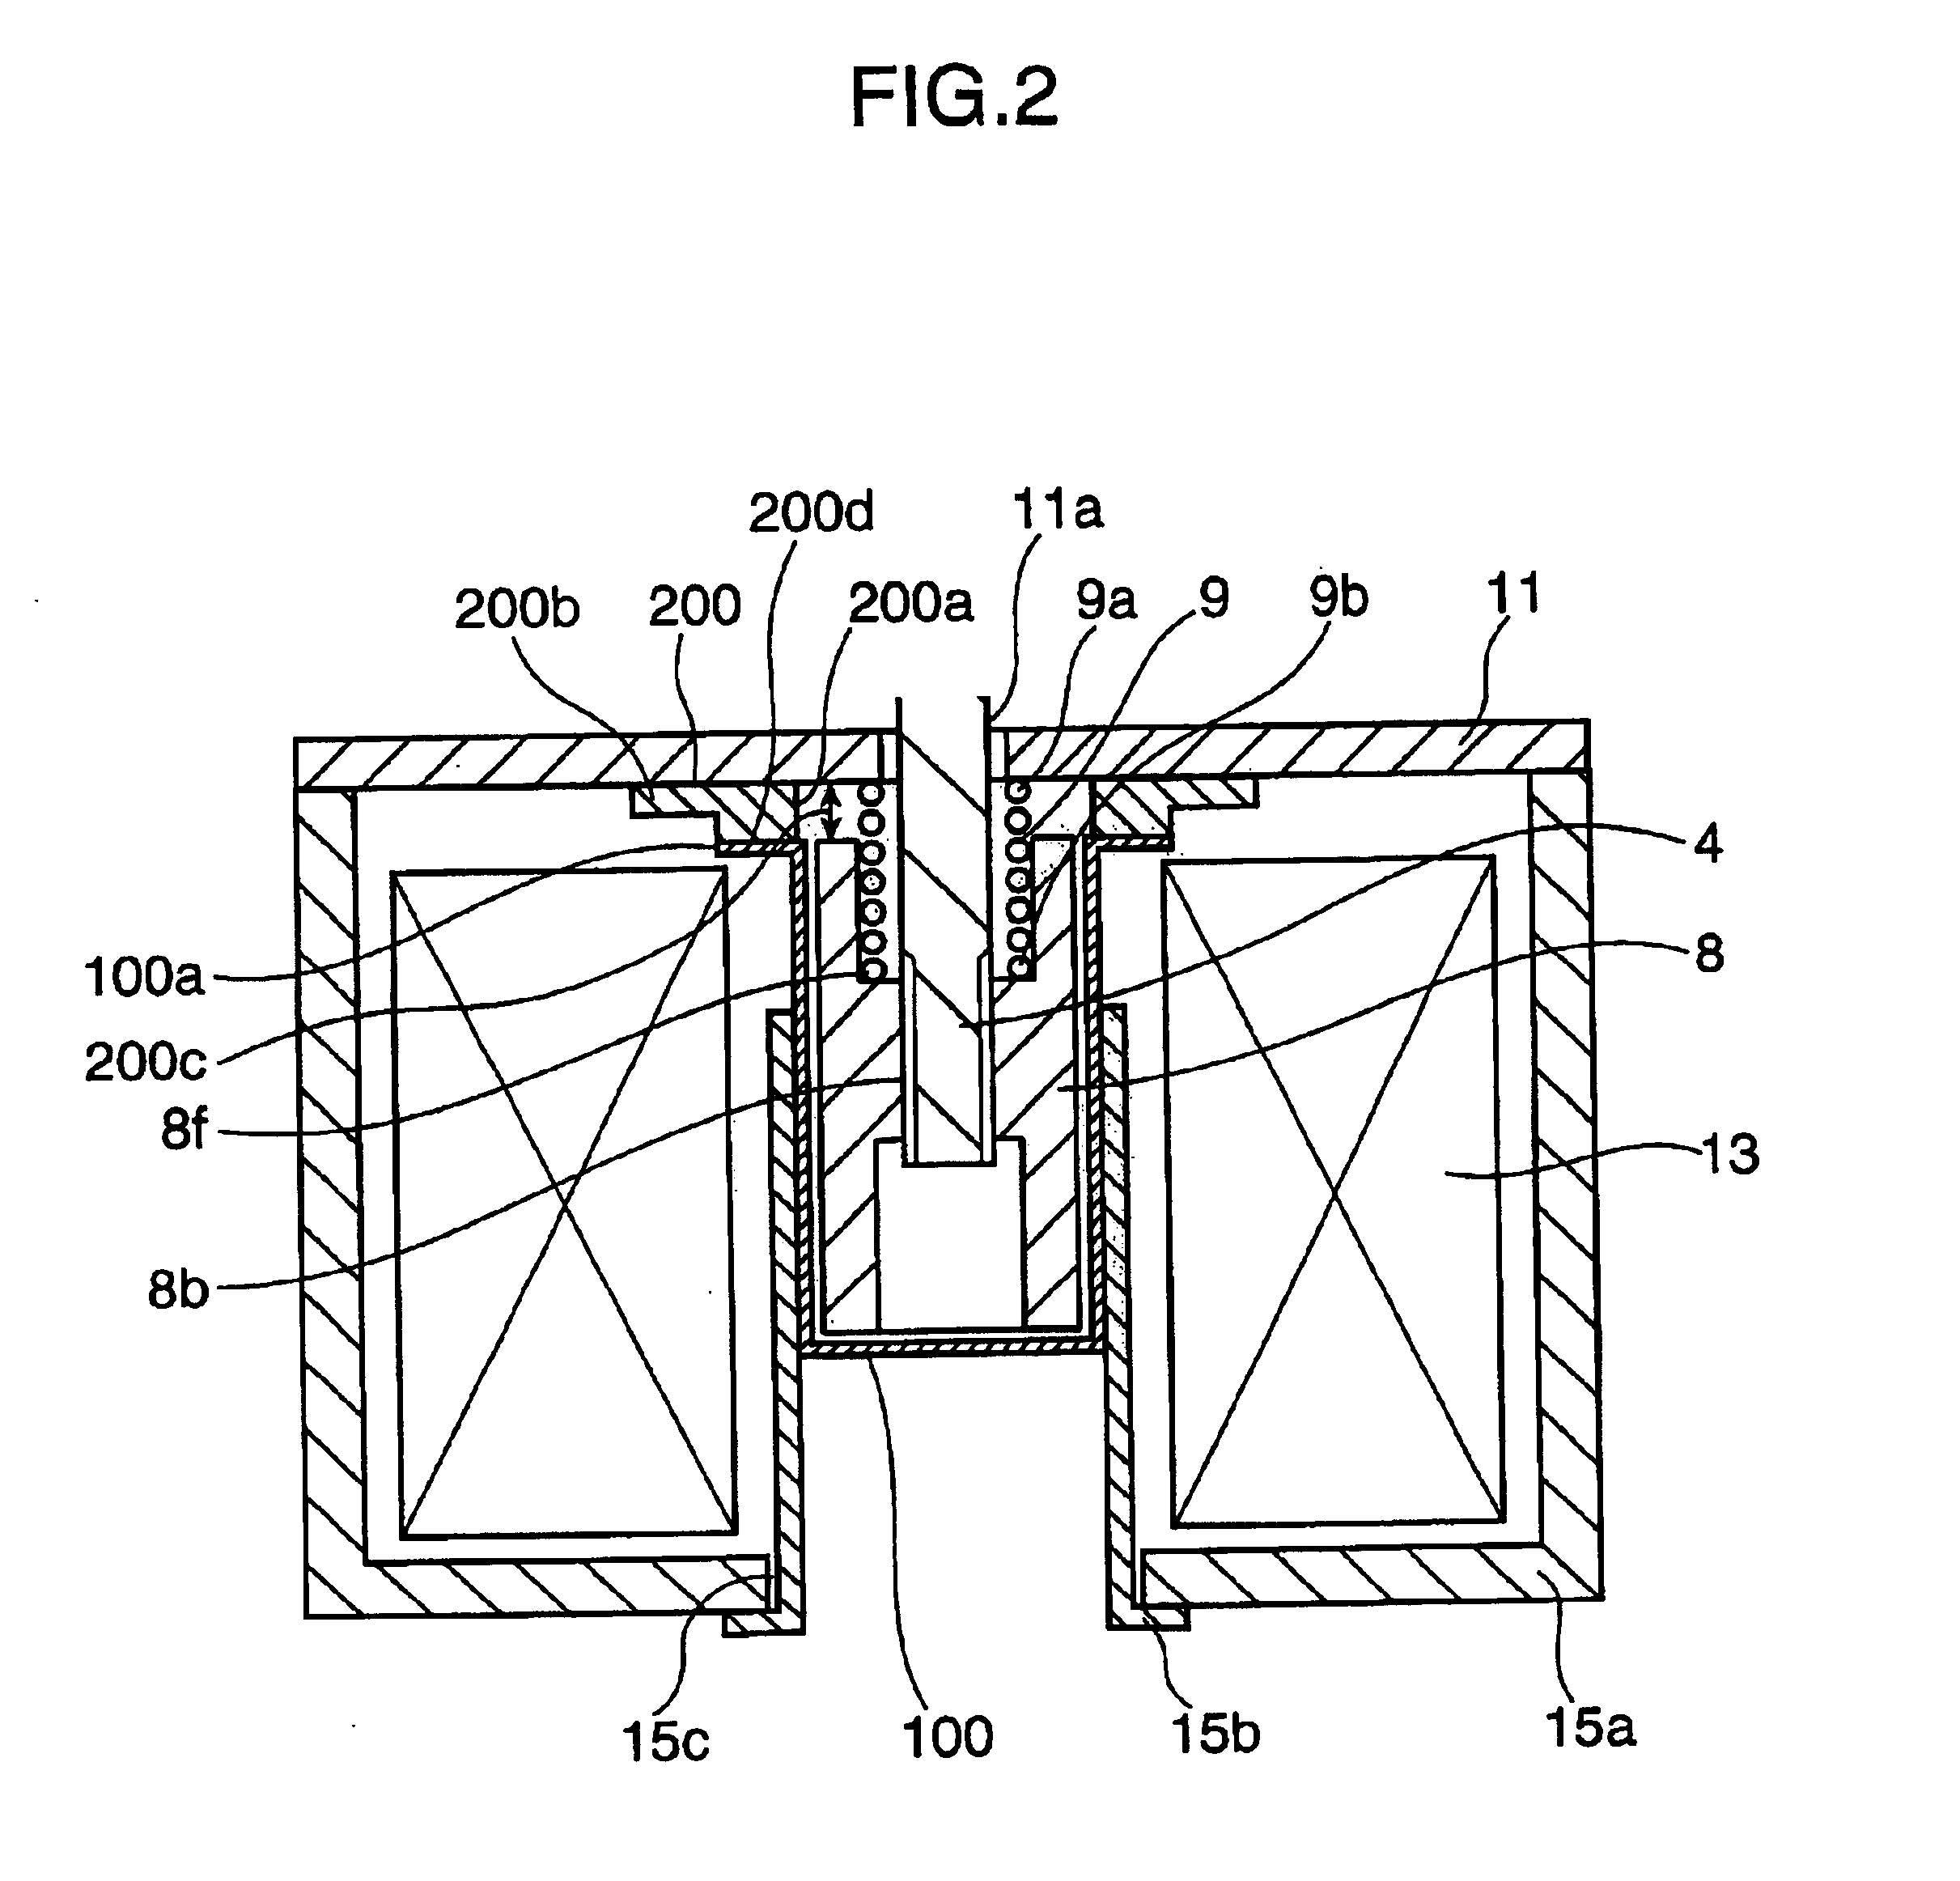 Electromagnetic switching apparatus